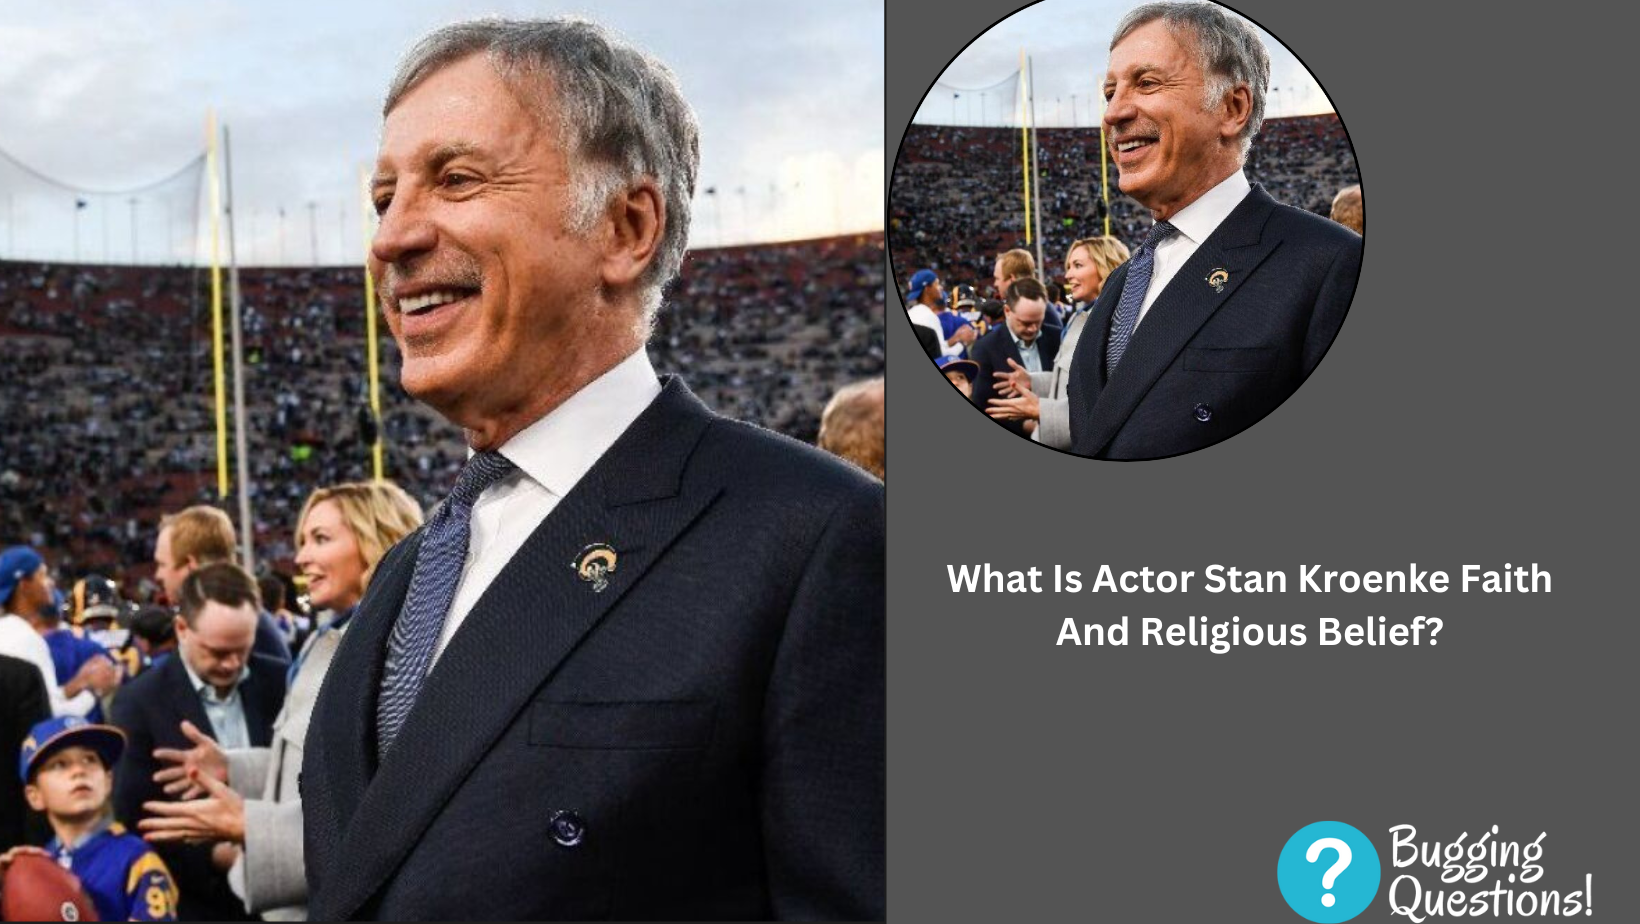 What Is Actor Stan Kroenke Faith And Religious Belief?